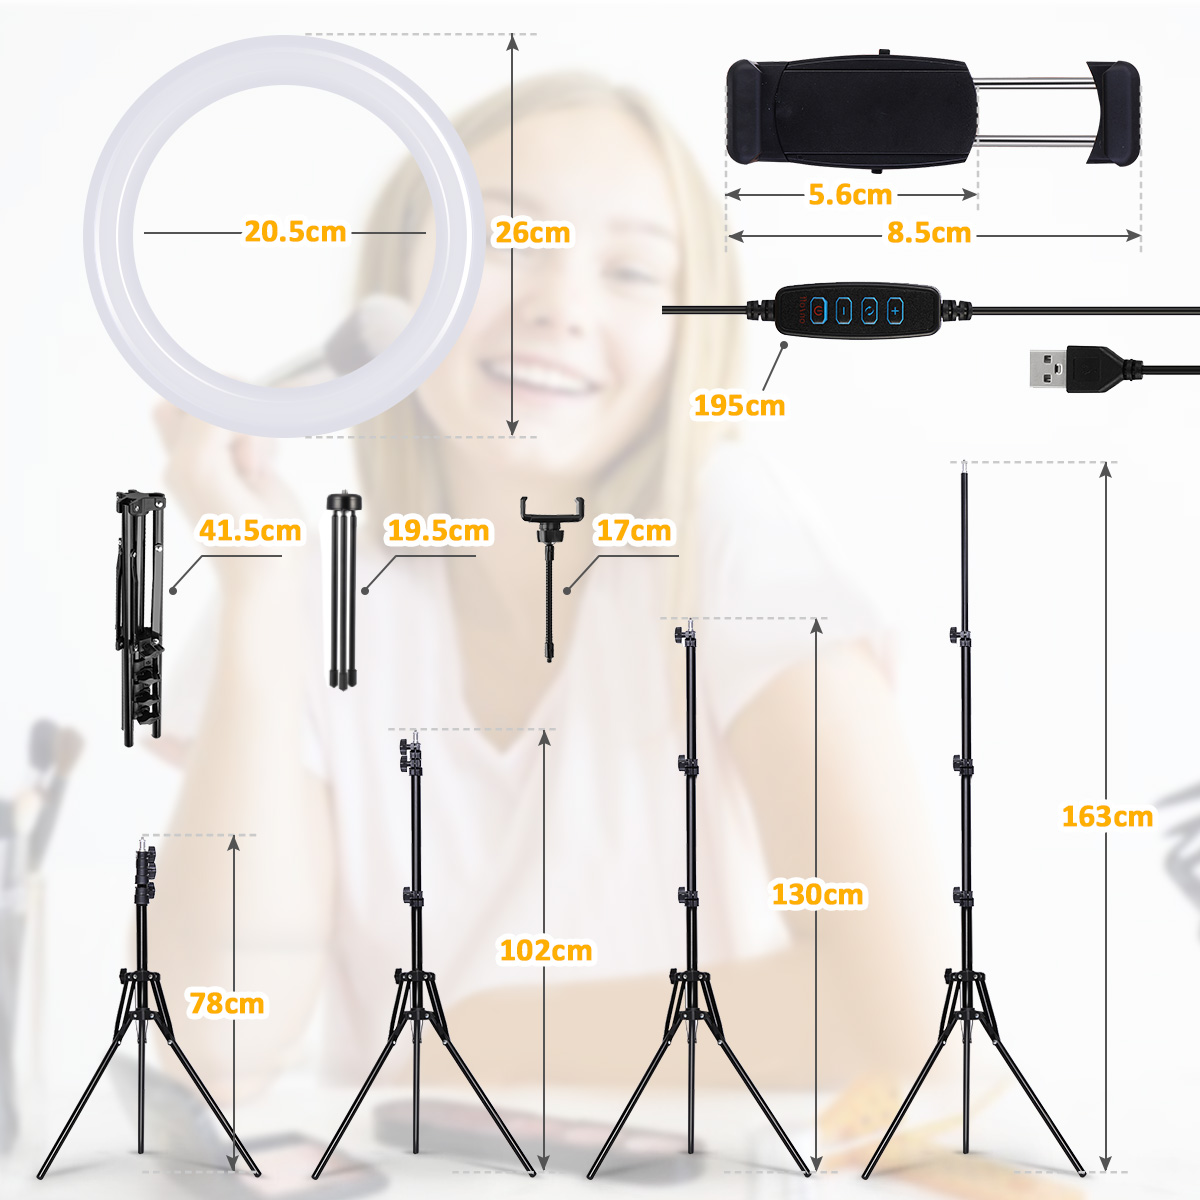 MOHOO-160cm-10-inch-3-Color-Modes-10-Brightness-Levels-USB-Video-Light-Tripod-Stand-for-Tik-Tok-Yout-1667980-9